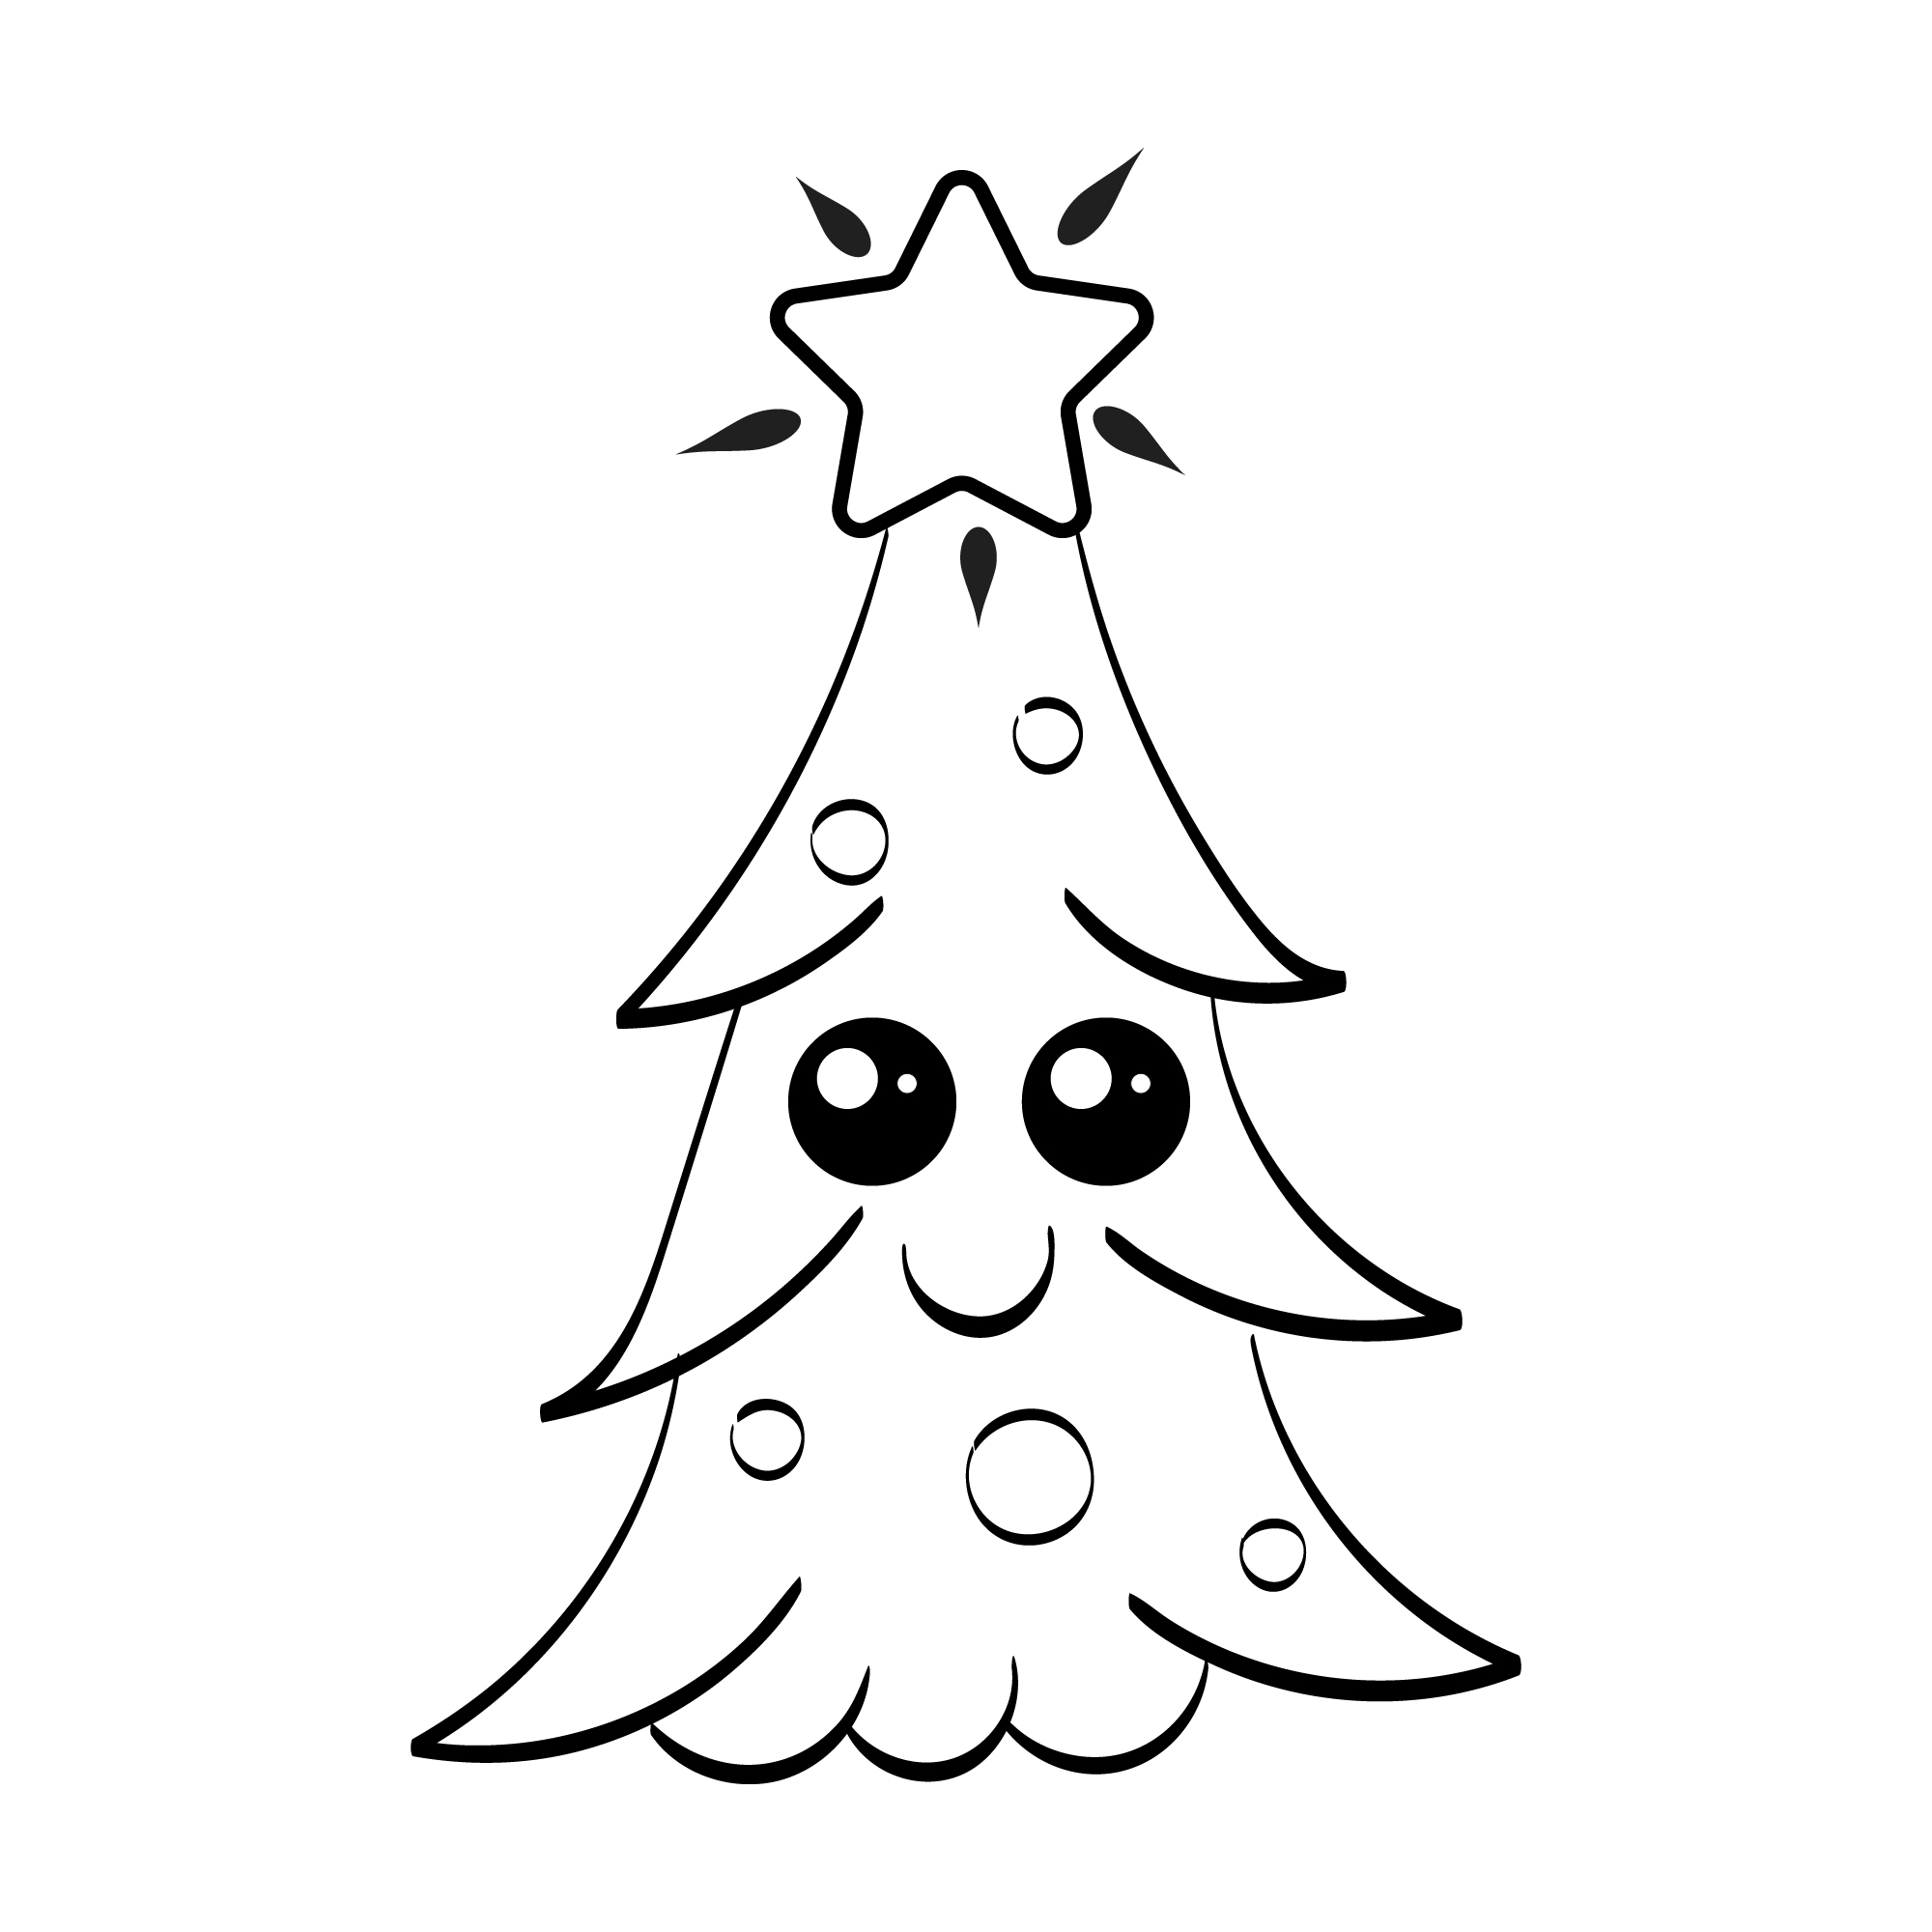 Wonderful hand-drawn picture of a Christmas tree.